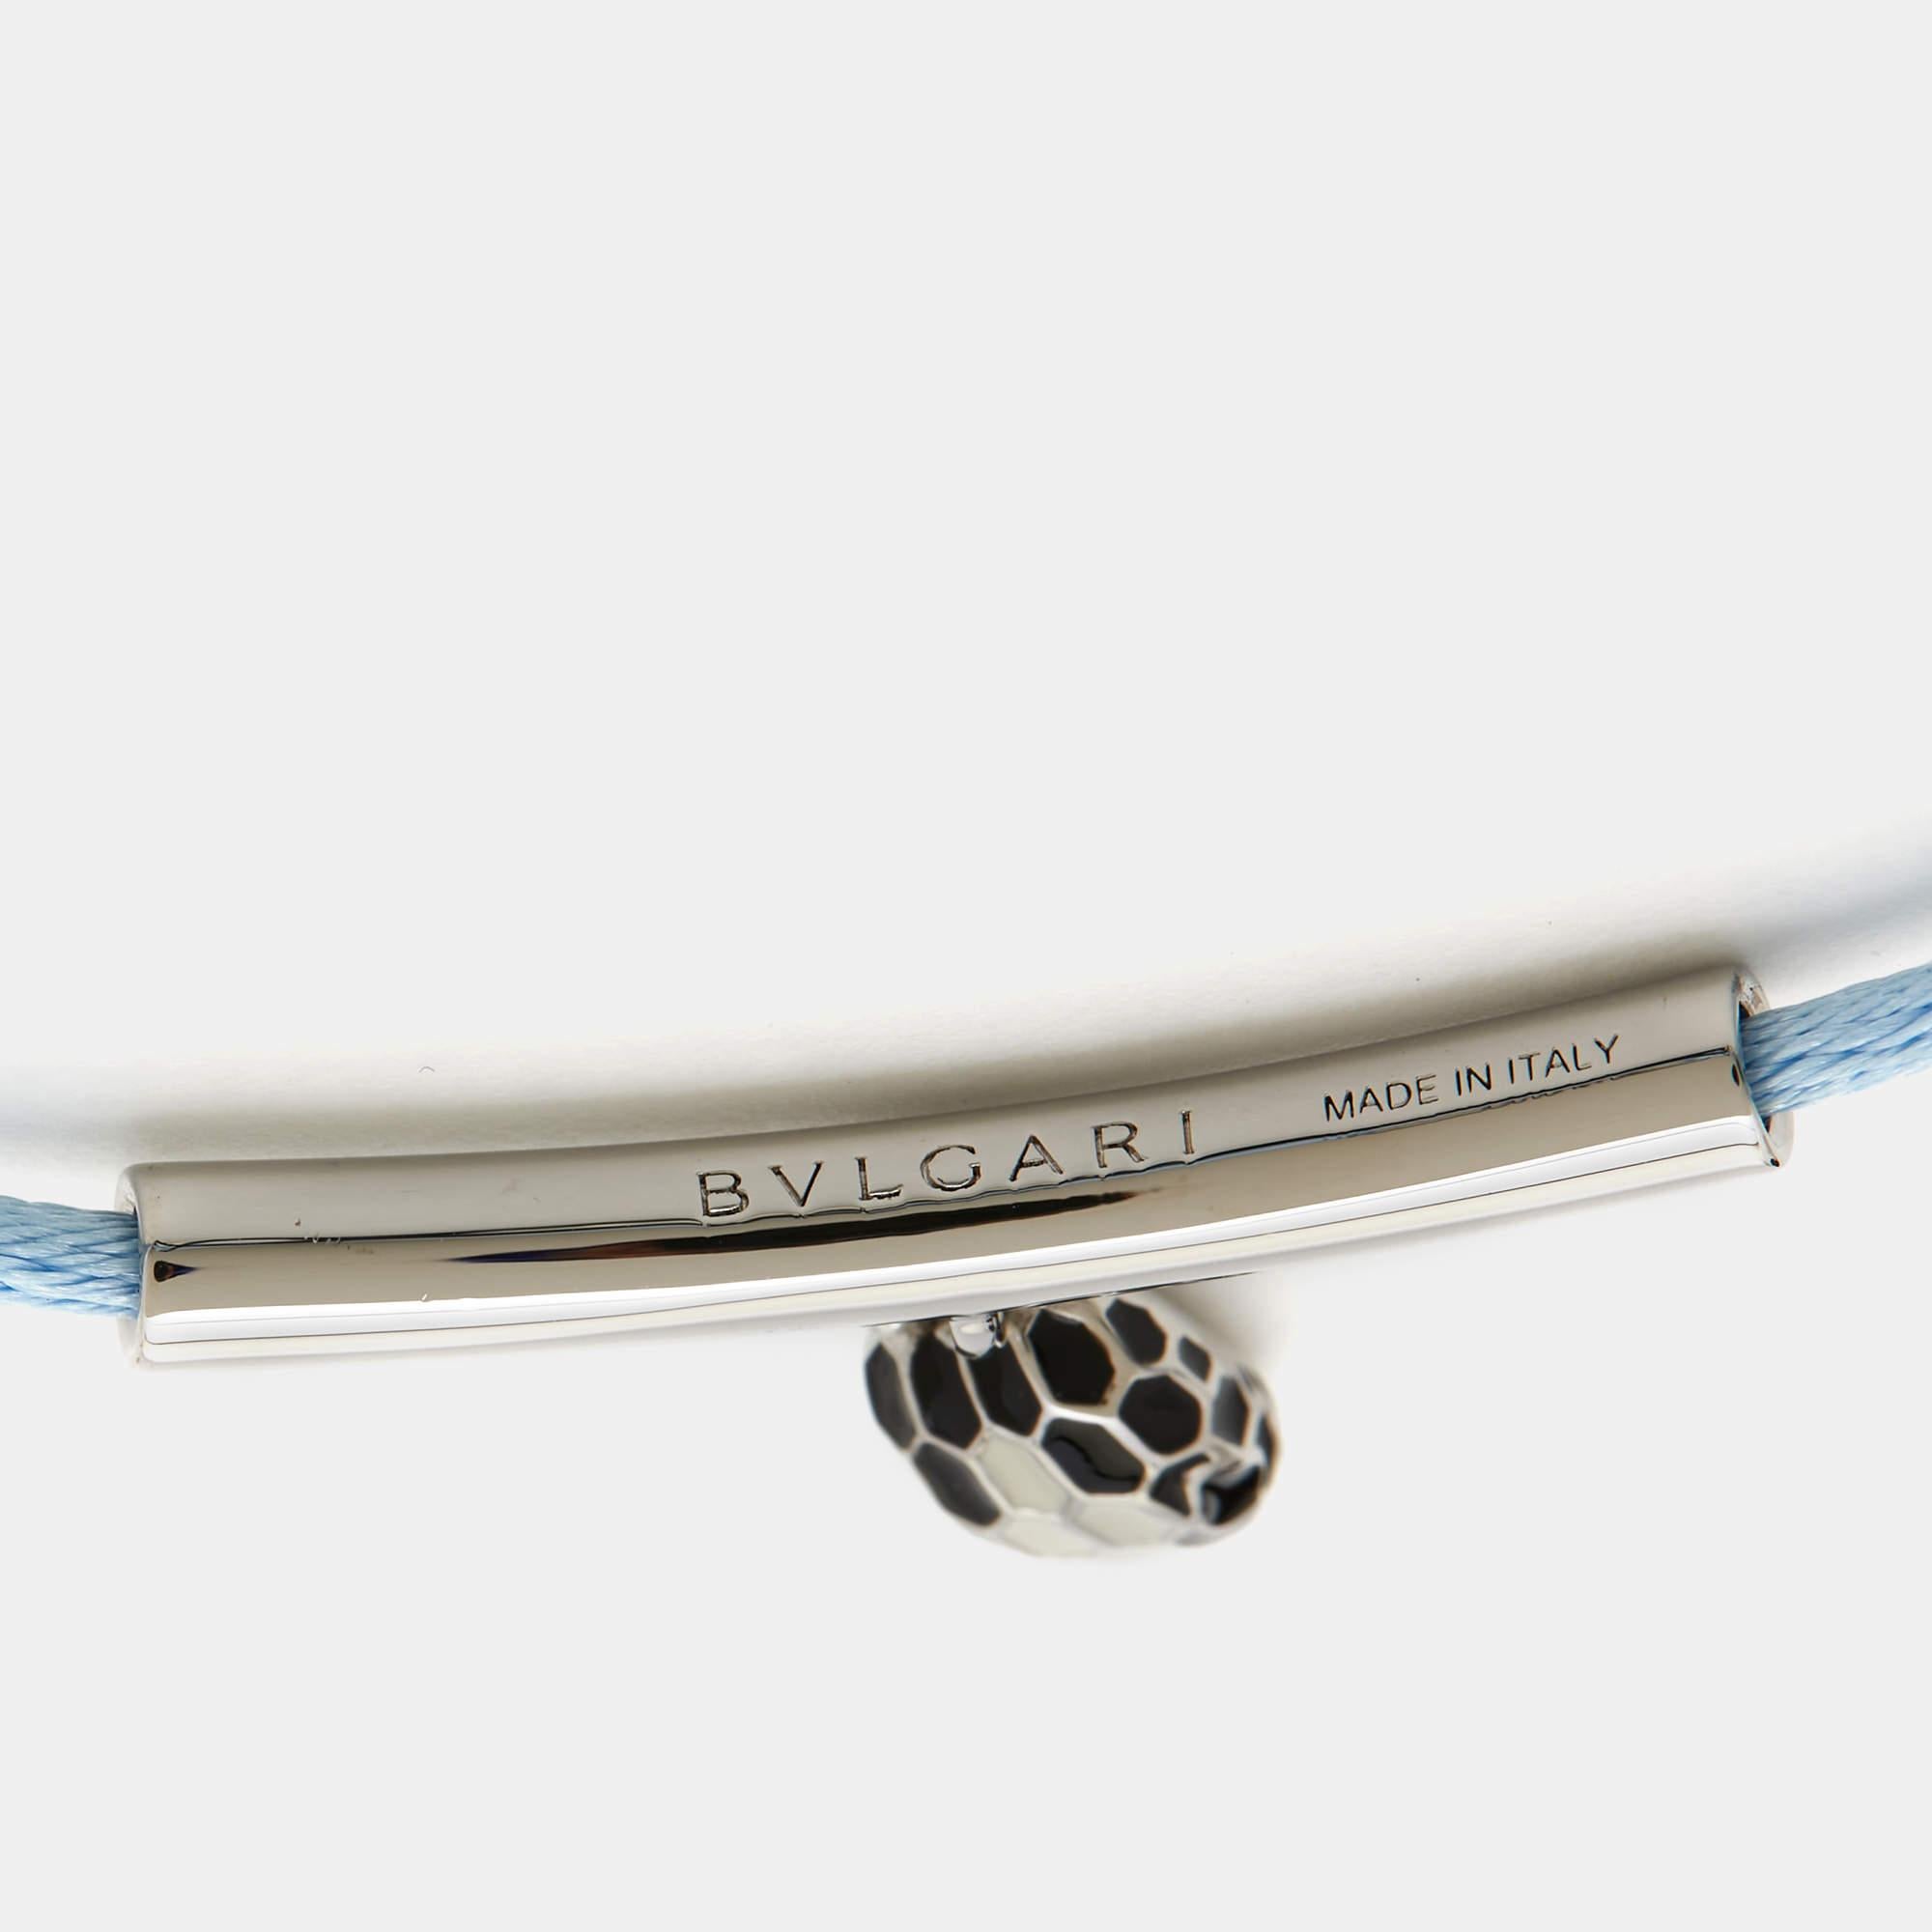 The Bvlgari Serpenti Forever bracelet is an exquisite accessory that intertwines luxury and style. Featuring the iconic serpent head in silver-tone, adorned with enamel detailing, it elegantly coils around the wrist, complemented by a sleek cord,